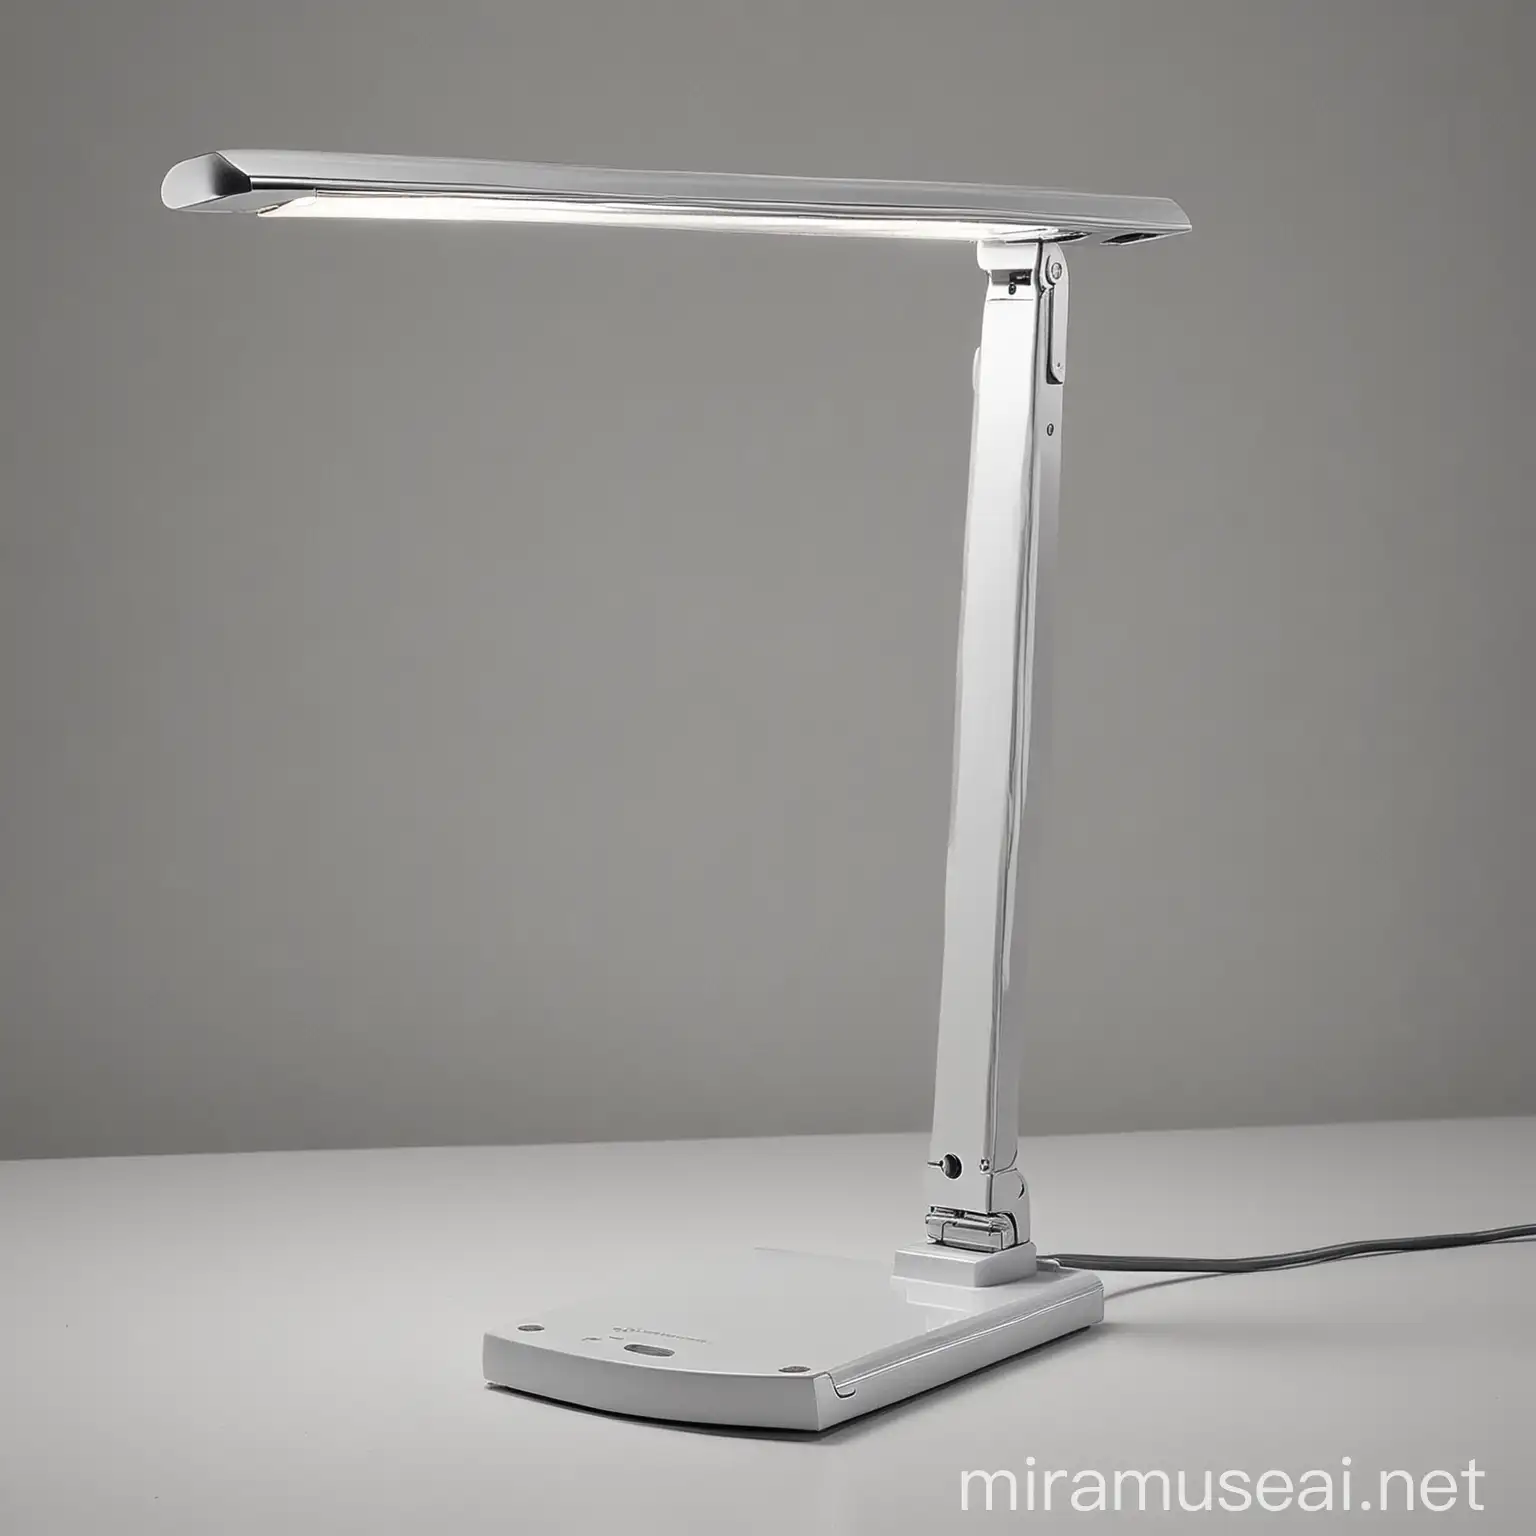 Slim Rectangular Desk Lamp with Adjustable Angle and Wireless Charging